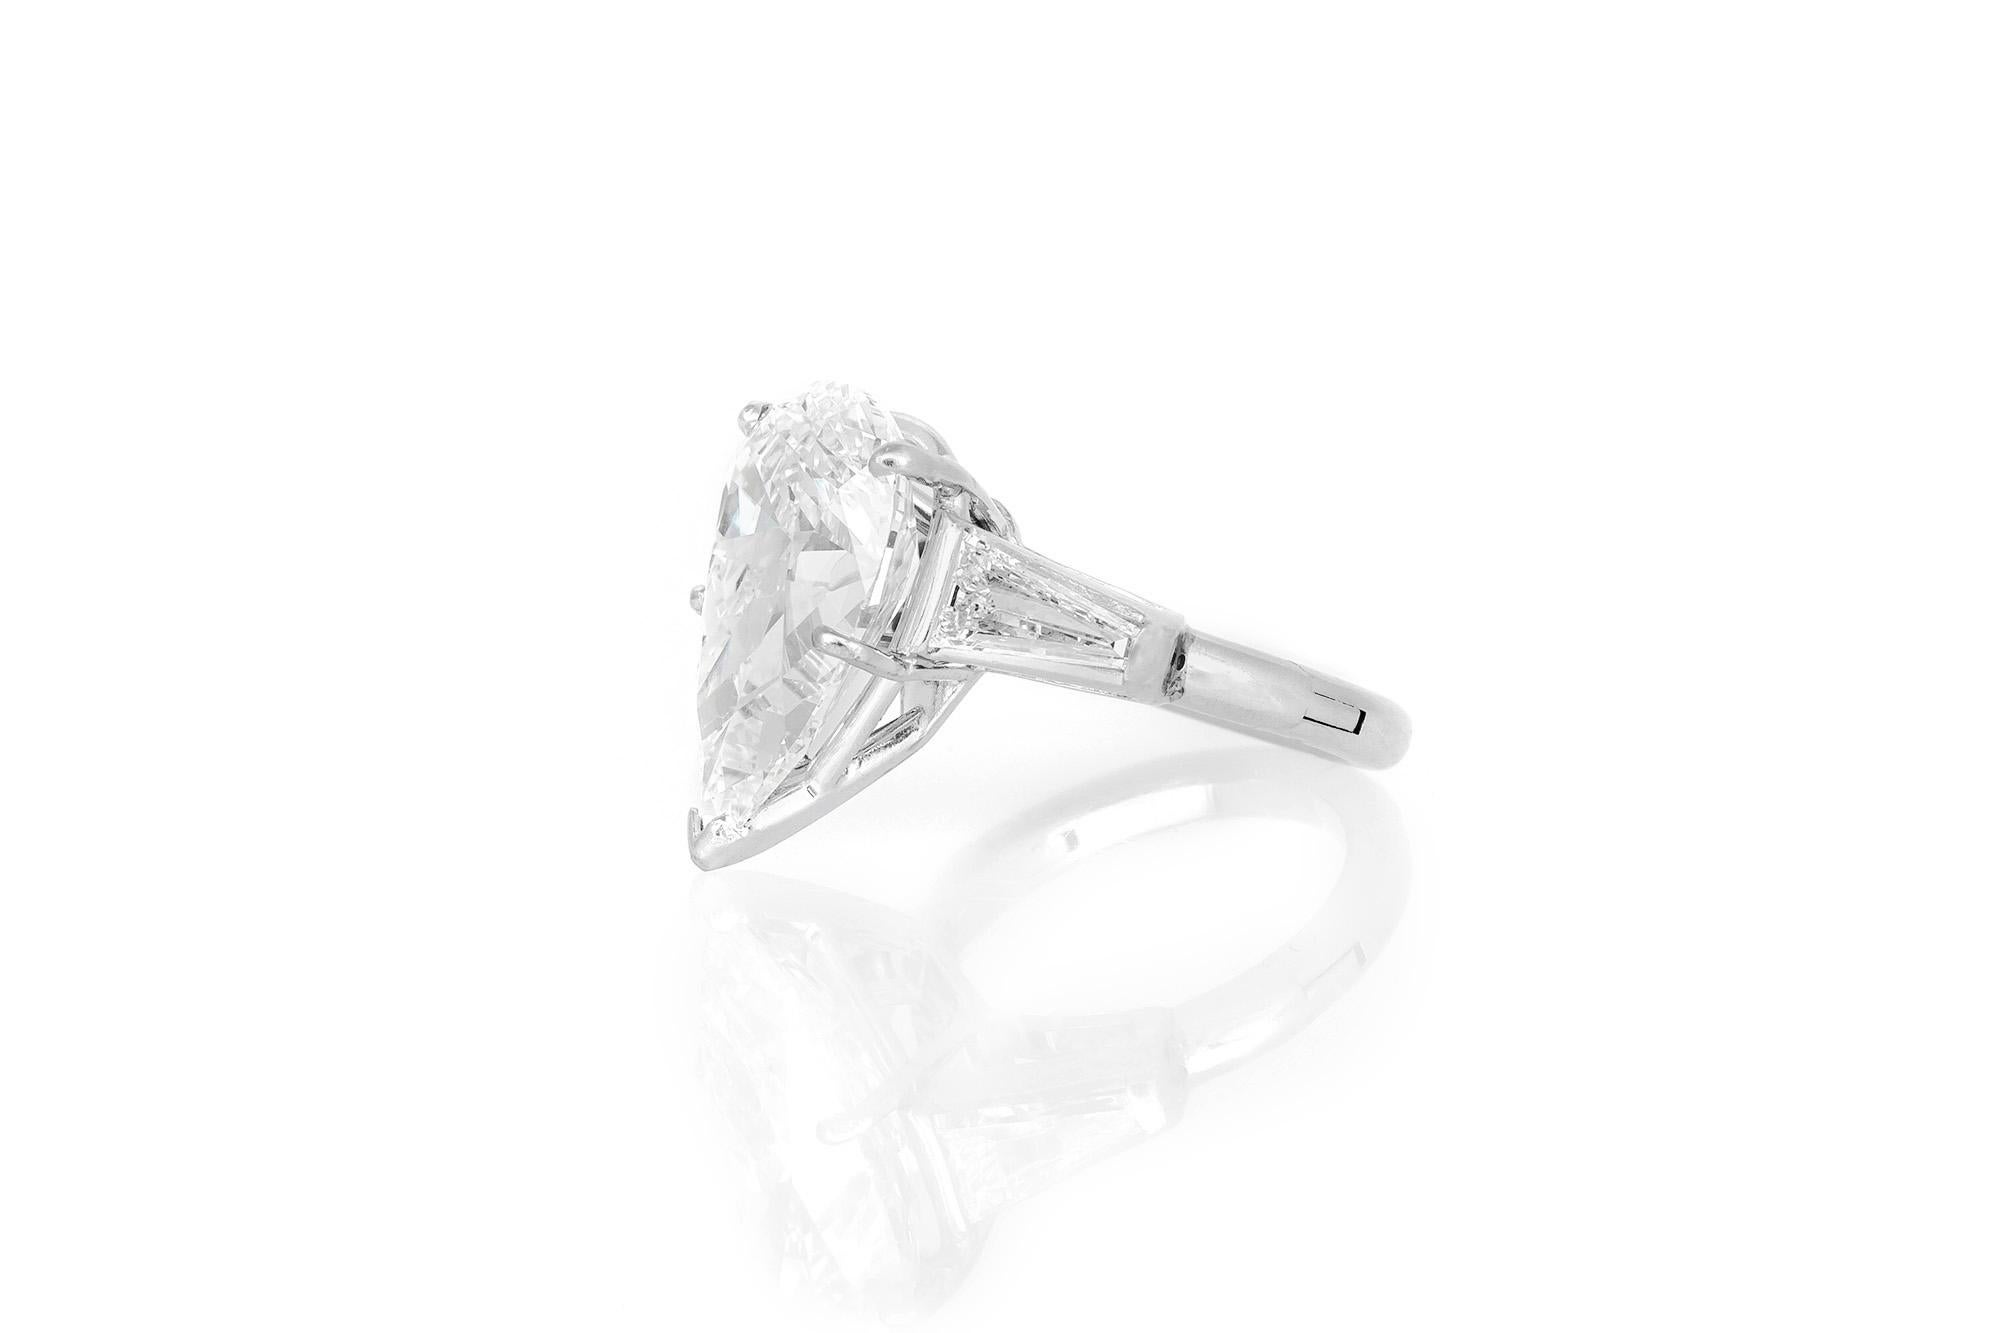 The ring is finely crafted in platinum with center stone pear shape and have gia cert weighing approximately total of 6.02 carat with two baguette on the side weighing approximately total of 0.80 carat.